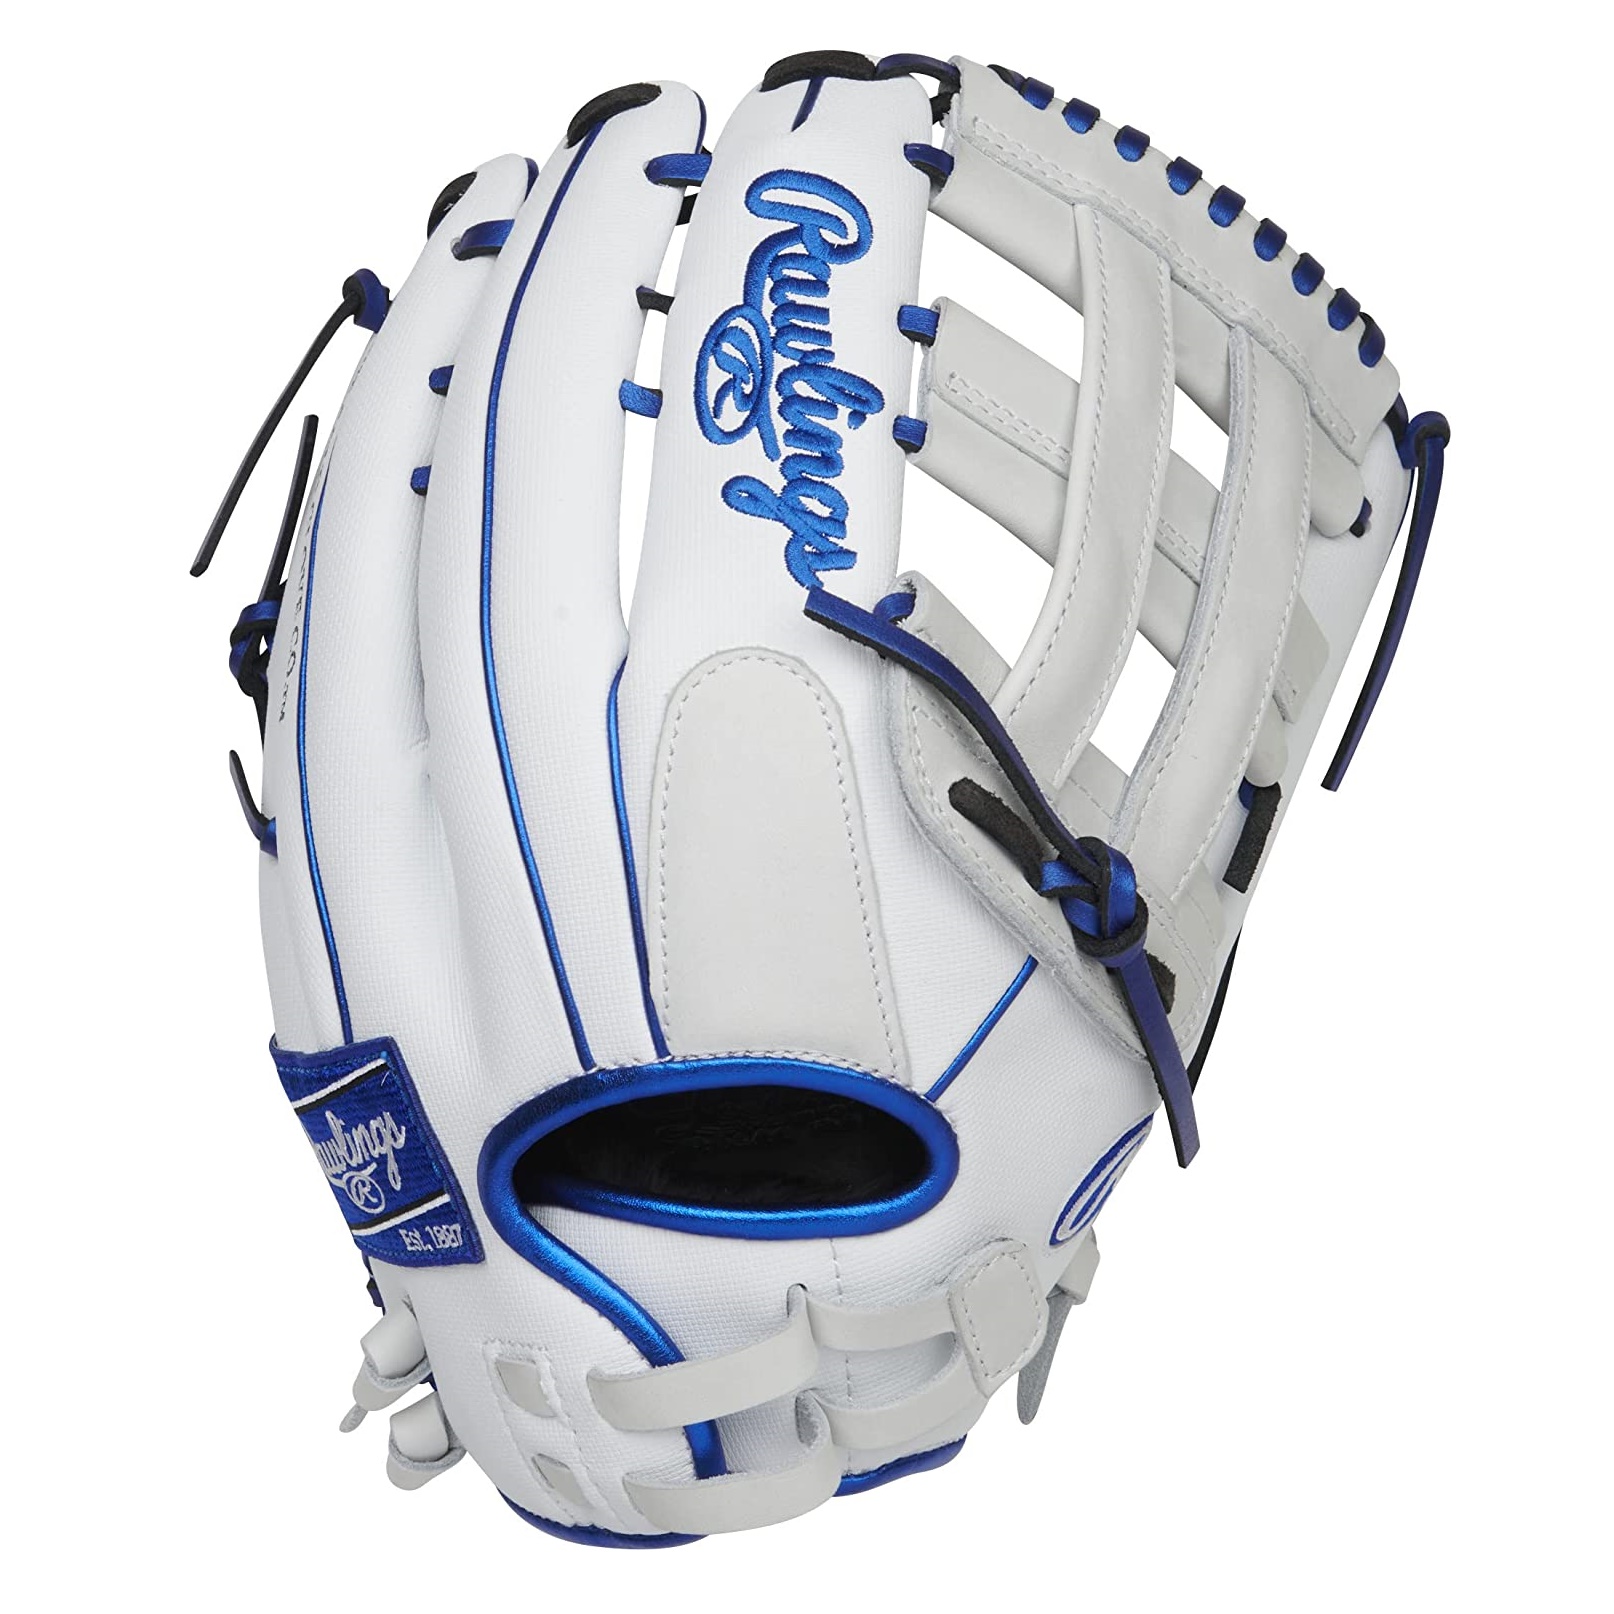 Rawlings Liberty Advanced fielding gloves continue the tradition as finest in the field.   PREMIUM MATERIALS  Crafted with quality, full-grain leather for enhanced durability STRONG AND DURABLE  Due to the Pro Grade leather laces and padded thumb sleeve PULL STRAP CLOSURES  Allow for each player to find the perfect fit to their hand IDEAL FOR AVID PLAYERS FROM HIGH SCHOOL TO THE PROS BREAK IN  70% Factory 30% Player 